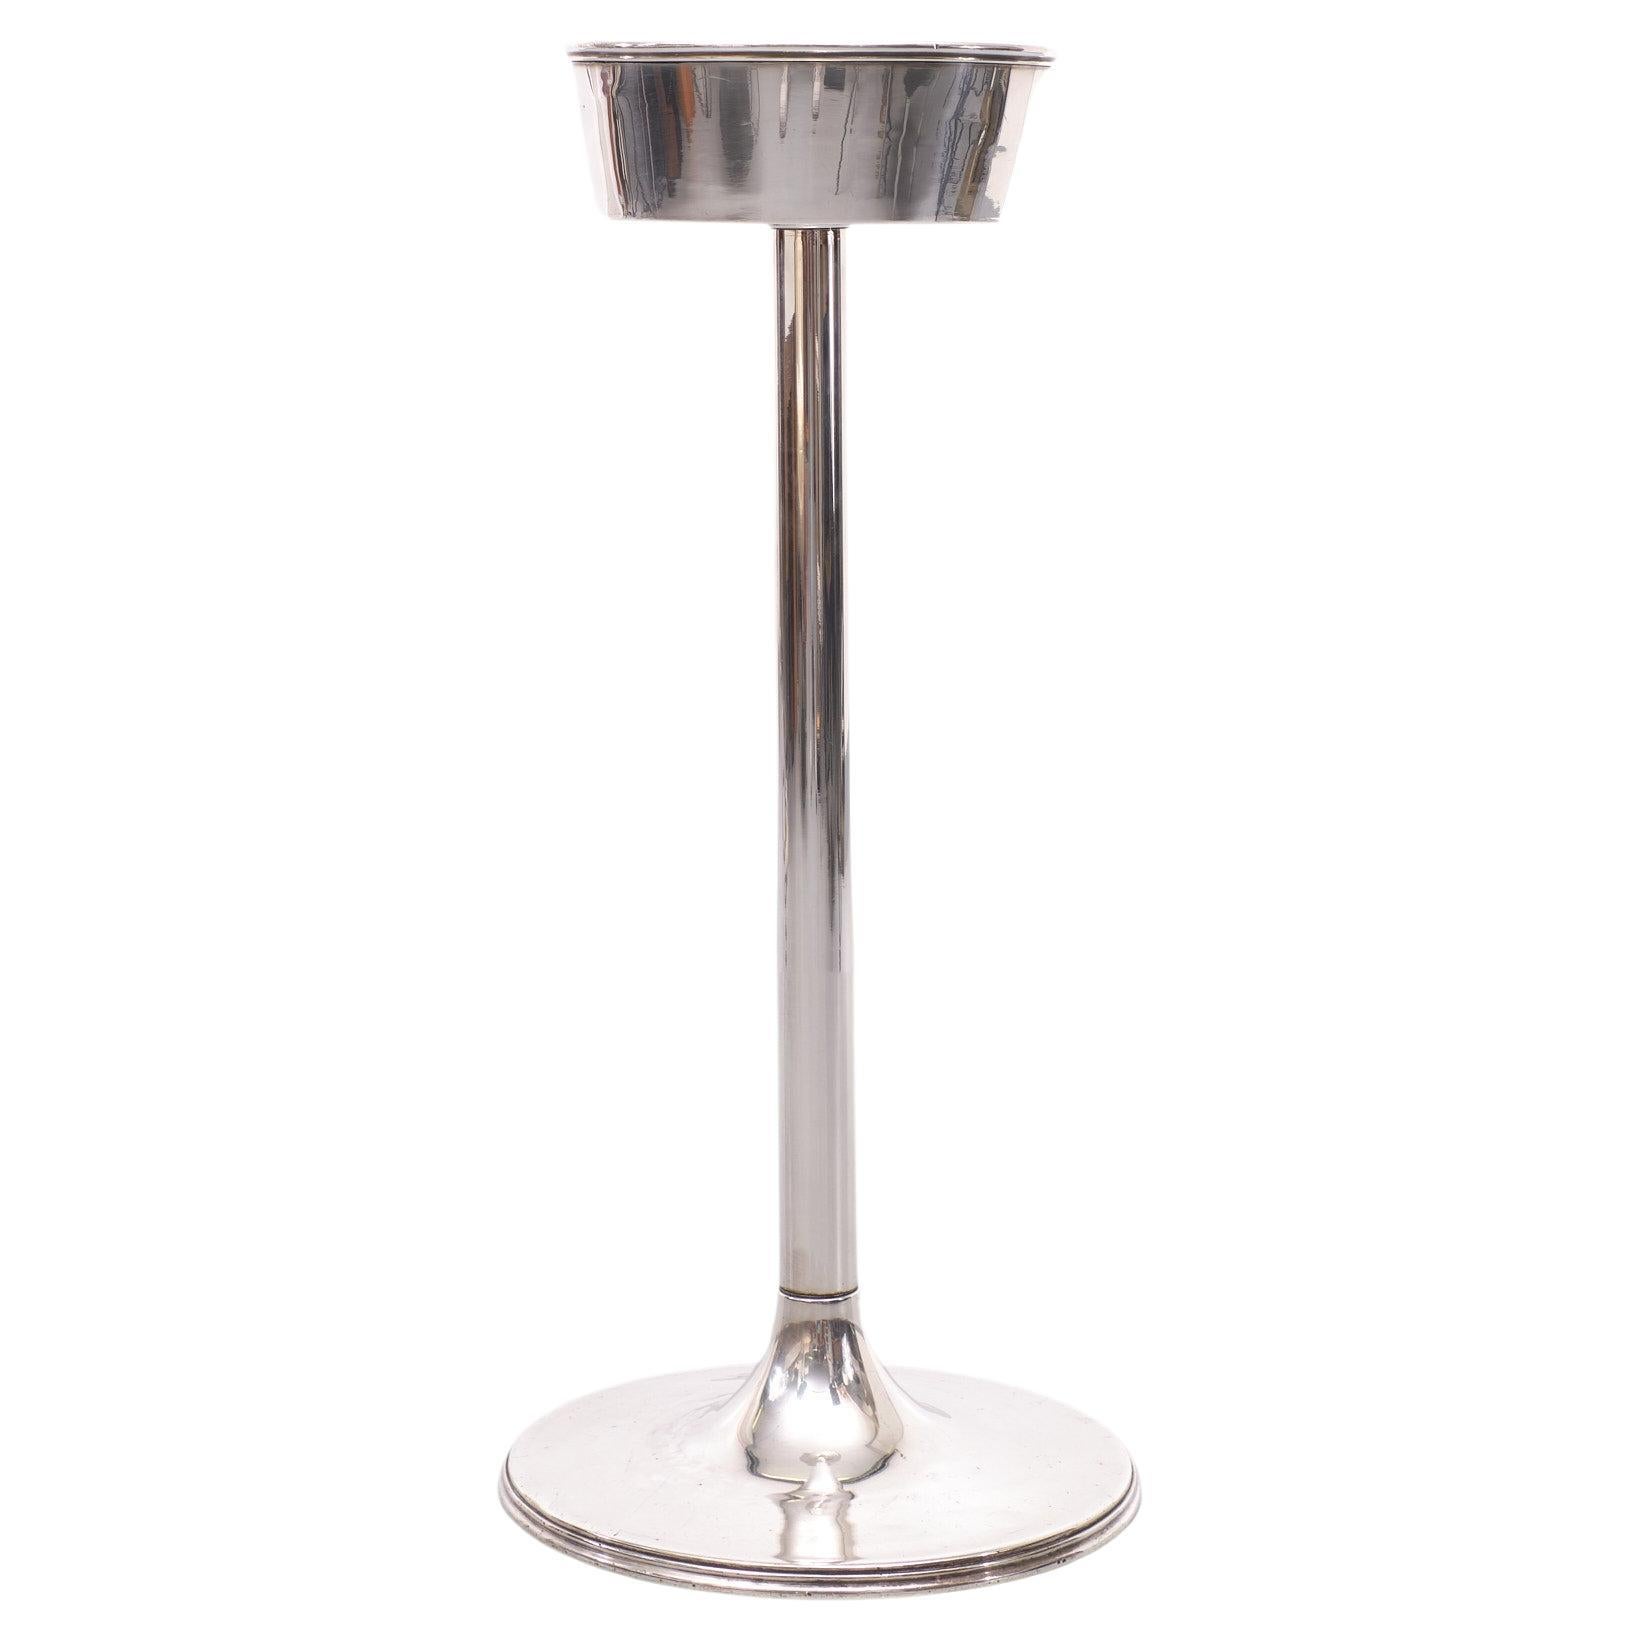 Art Deco Silver Plated Champagne cooler holder . Nice quality 
Oval shape bucket . Normal wear and tear,after 100 years .some dents in the base gives it character . 
